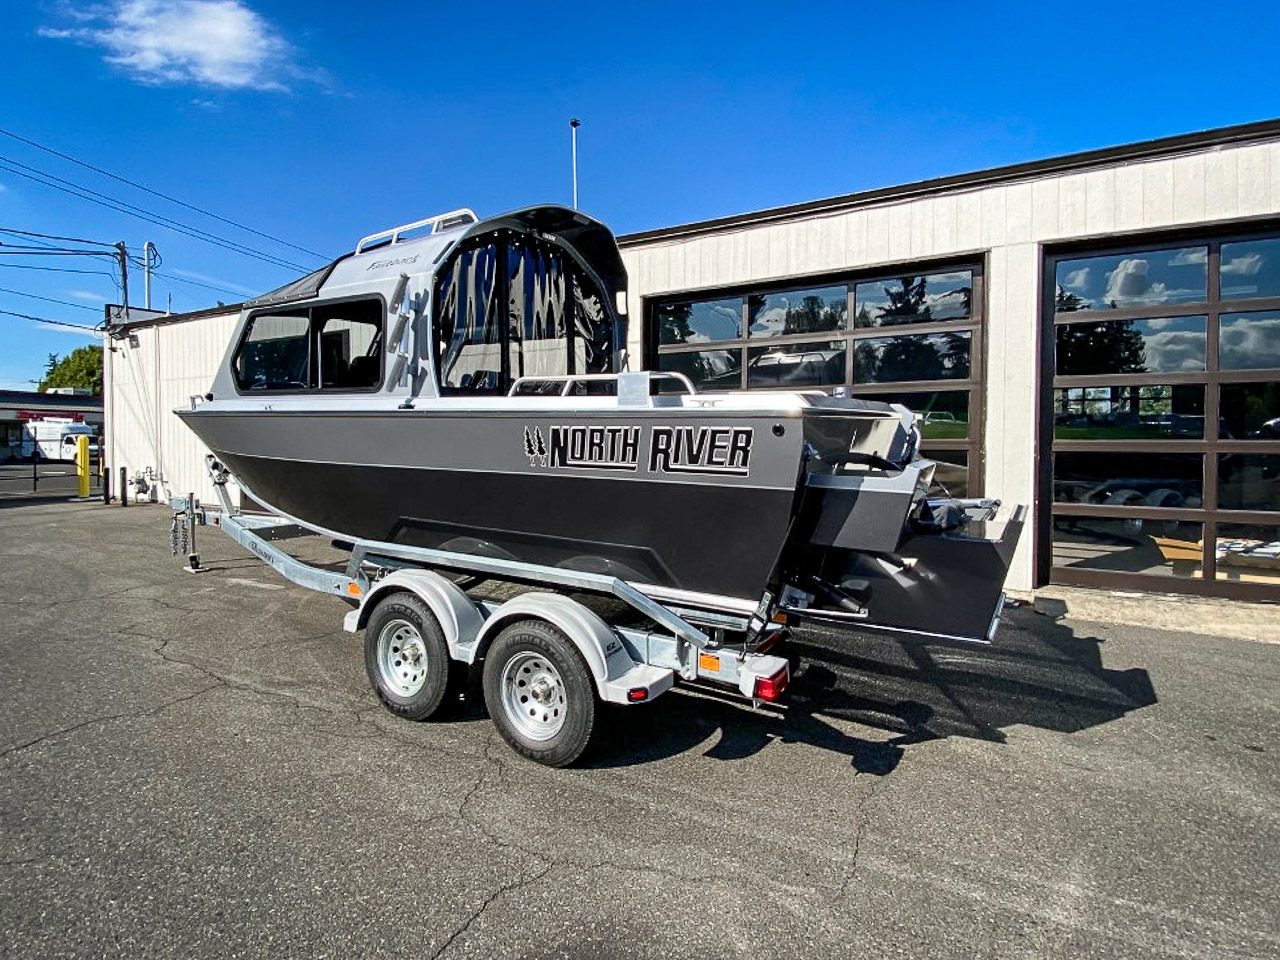 North River 21 Seahawk Fastback - ON ORDER